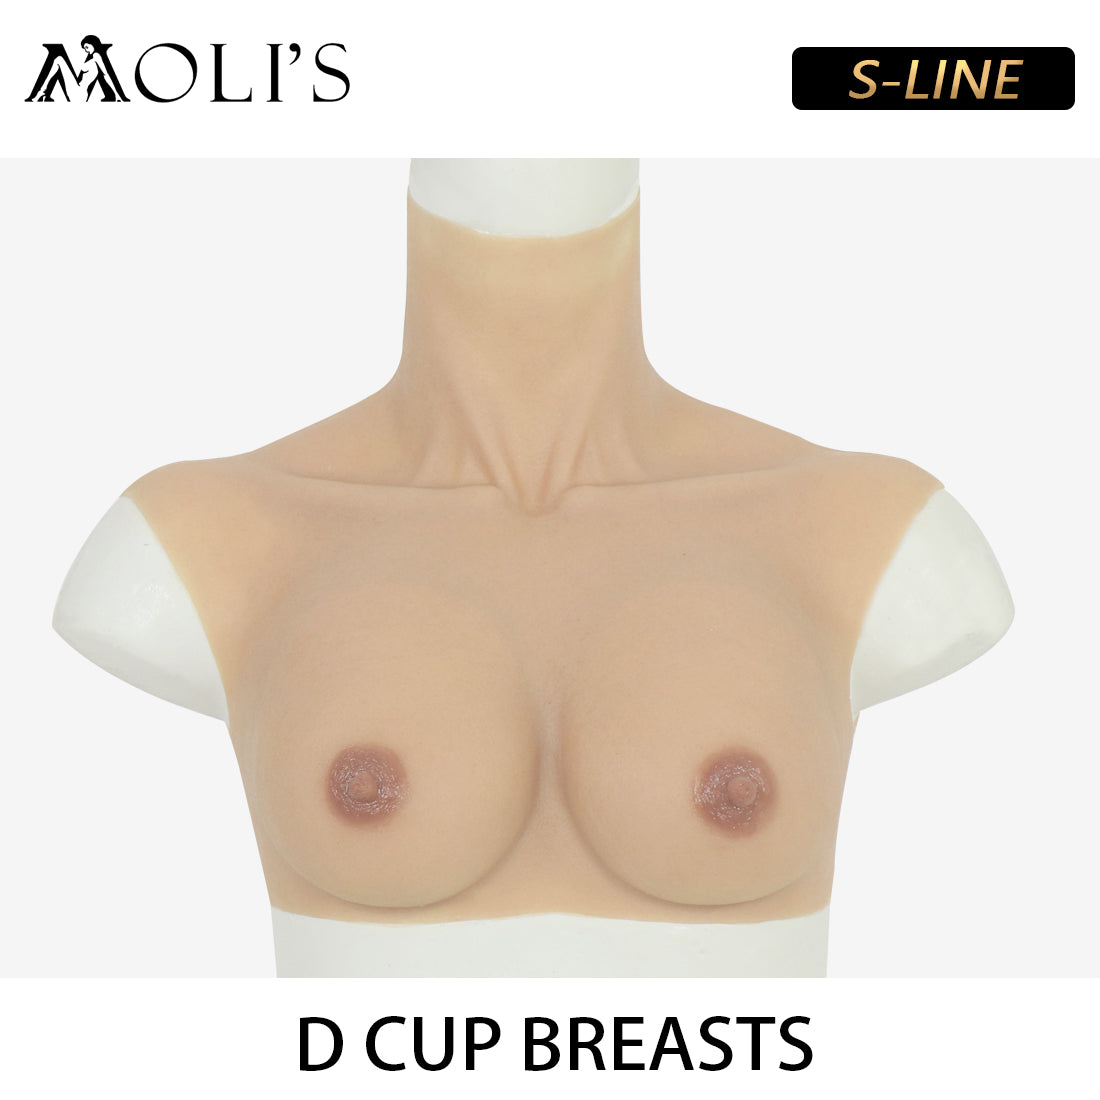 S-LINE | NEW D CUP SILICONE BREASTS ENHANCED DETAILS